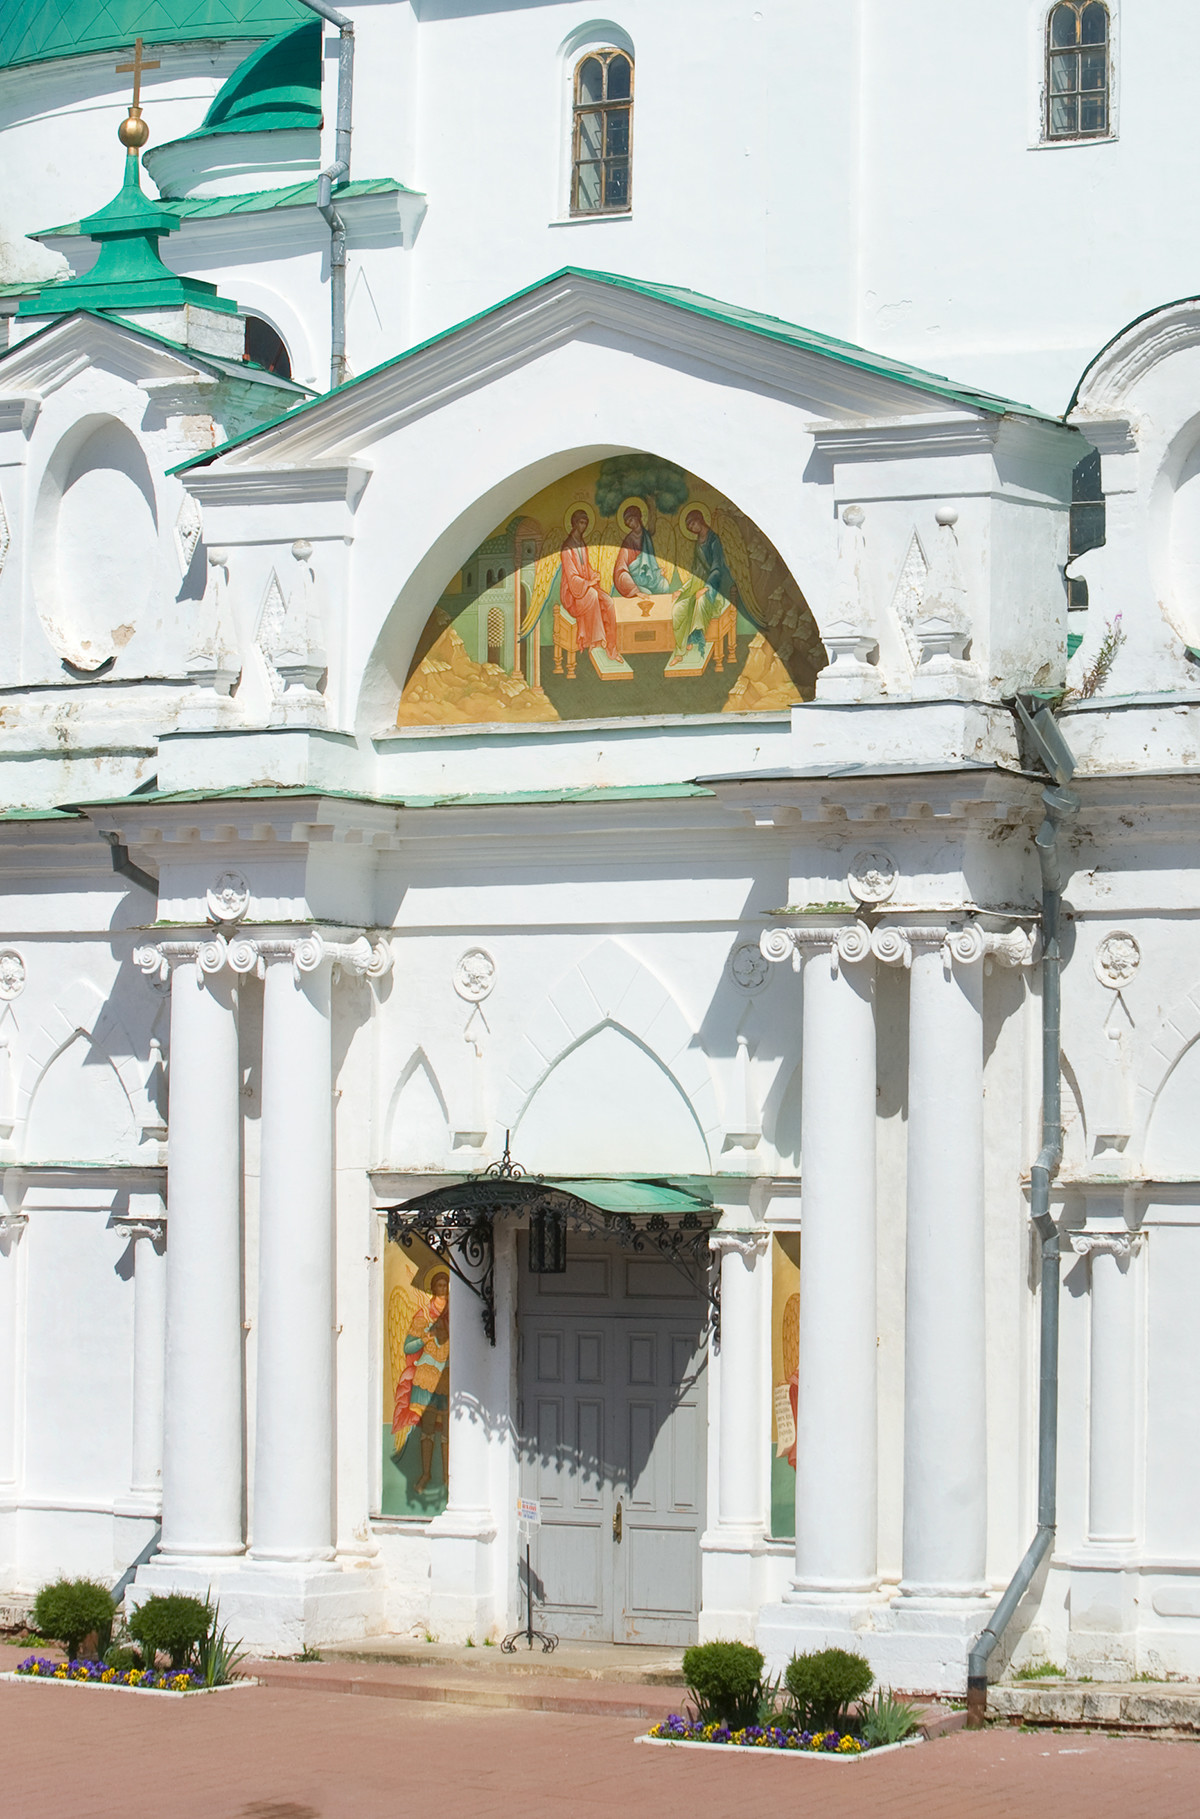 Cathedral of Conception of St. Anne. West view with main entrance. Painting of Old Testament Trinity on tympanum of narthex pediment. July 7, 2019 